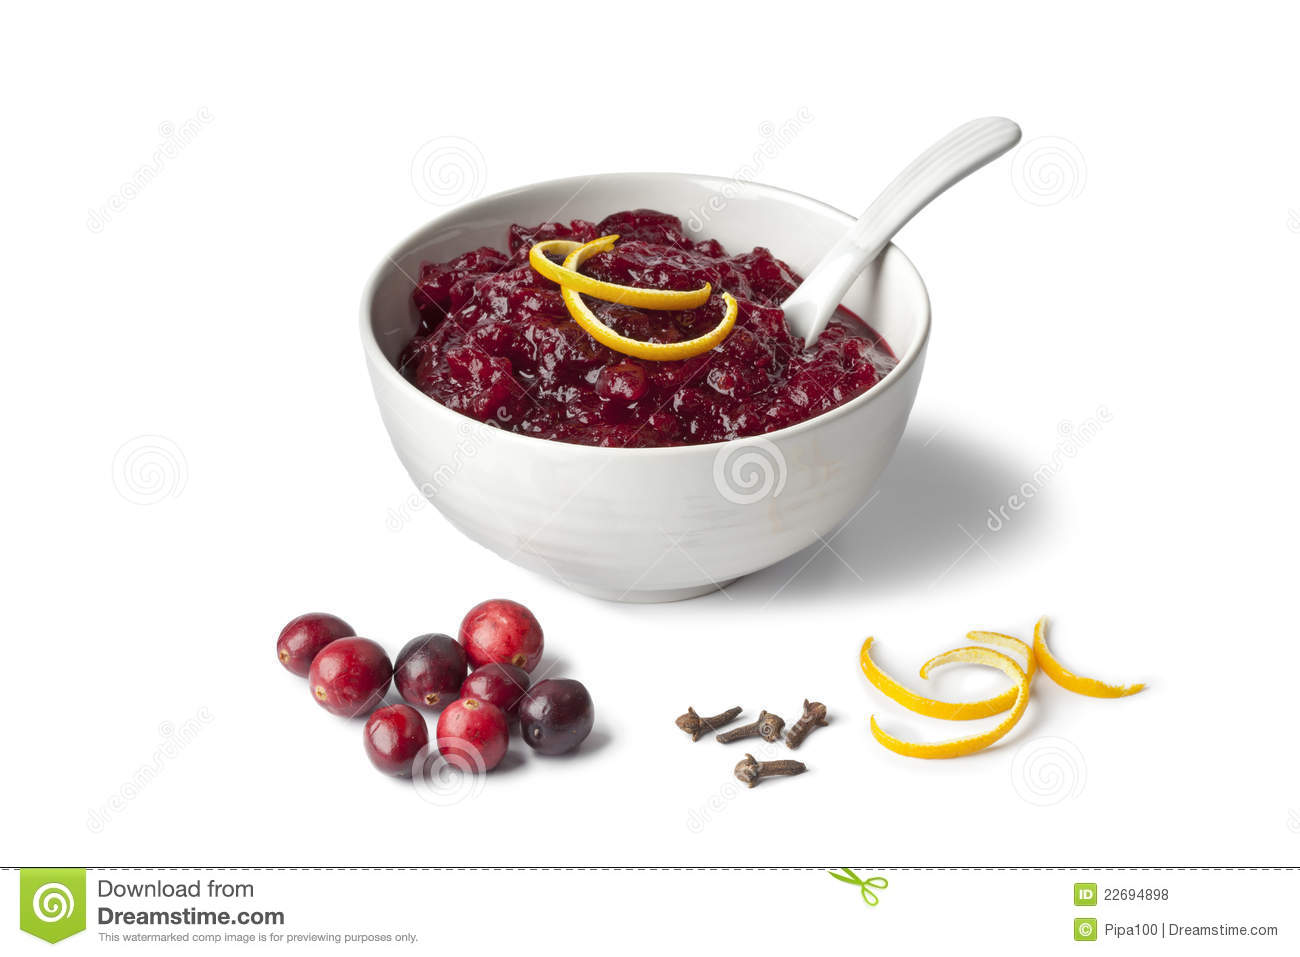 Fresh Cranberry Sauce With Orange And Cloves Royalty Free Stock Photos